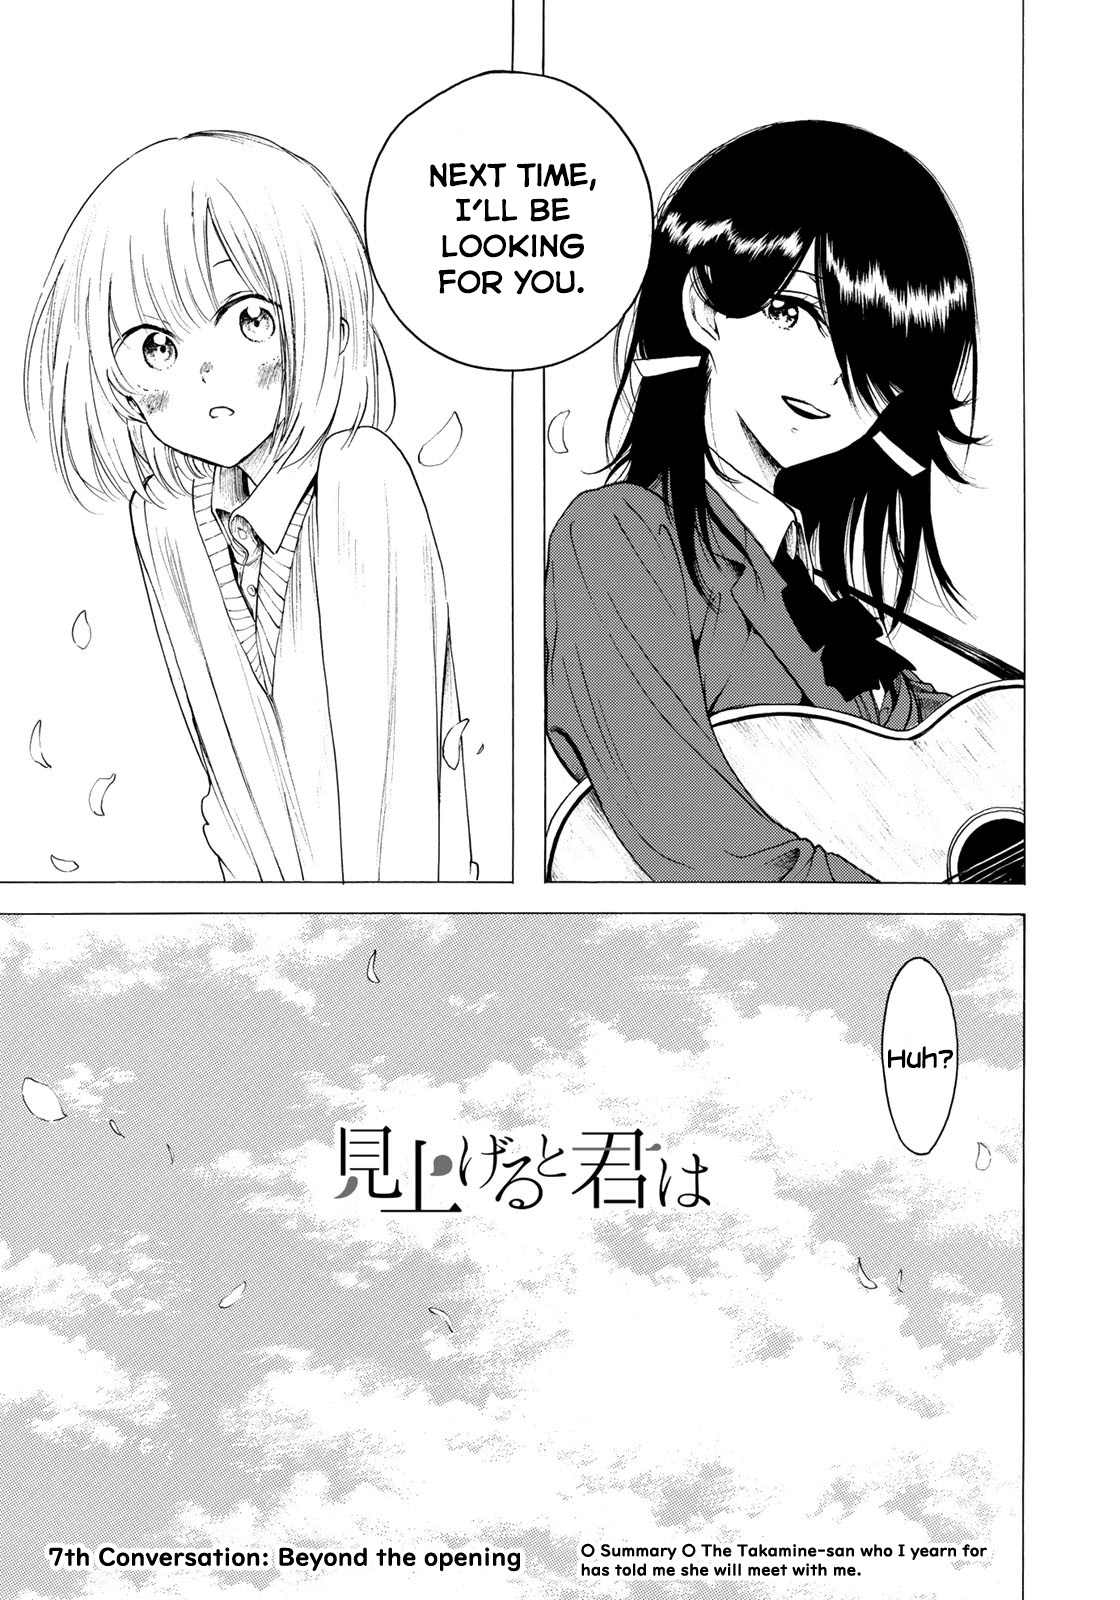 Looking Up to You Vol. 1 Ch. 7 Beyond the opening